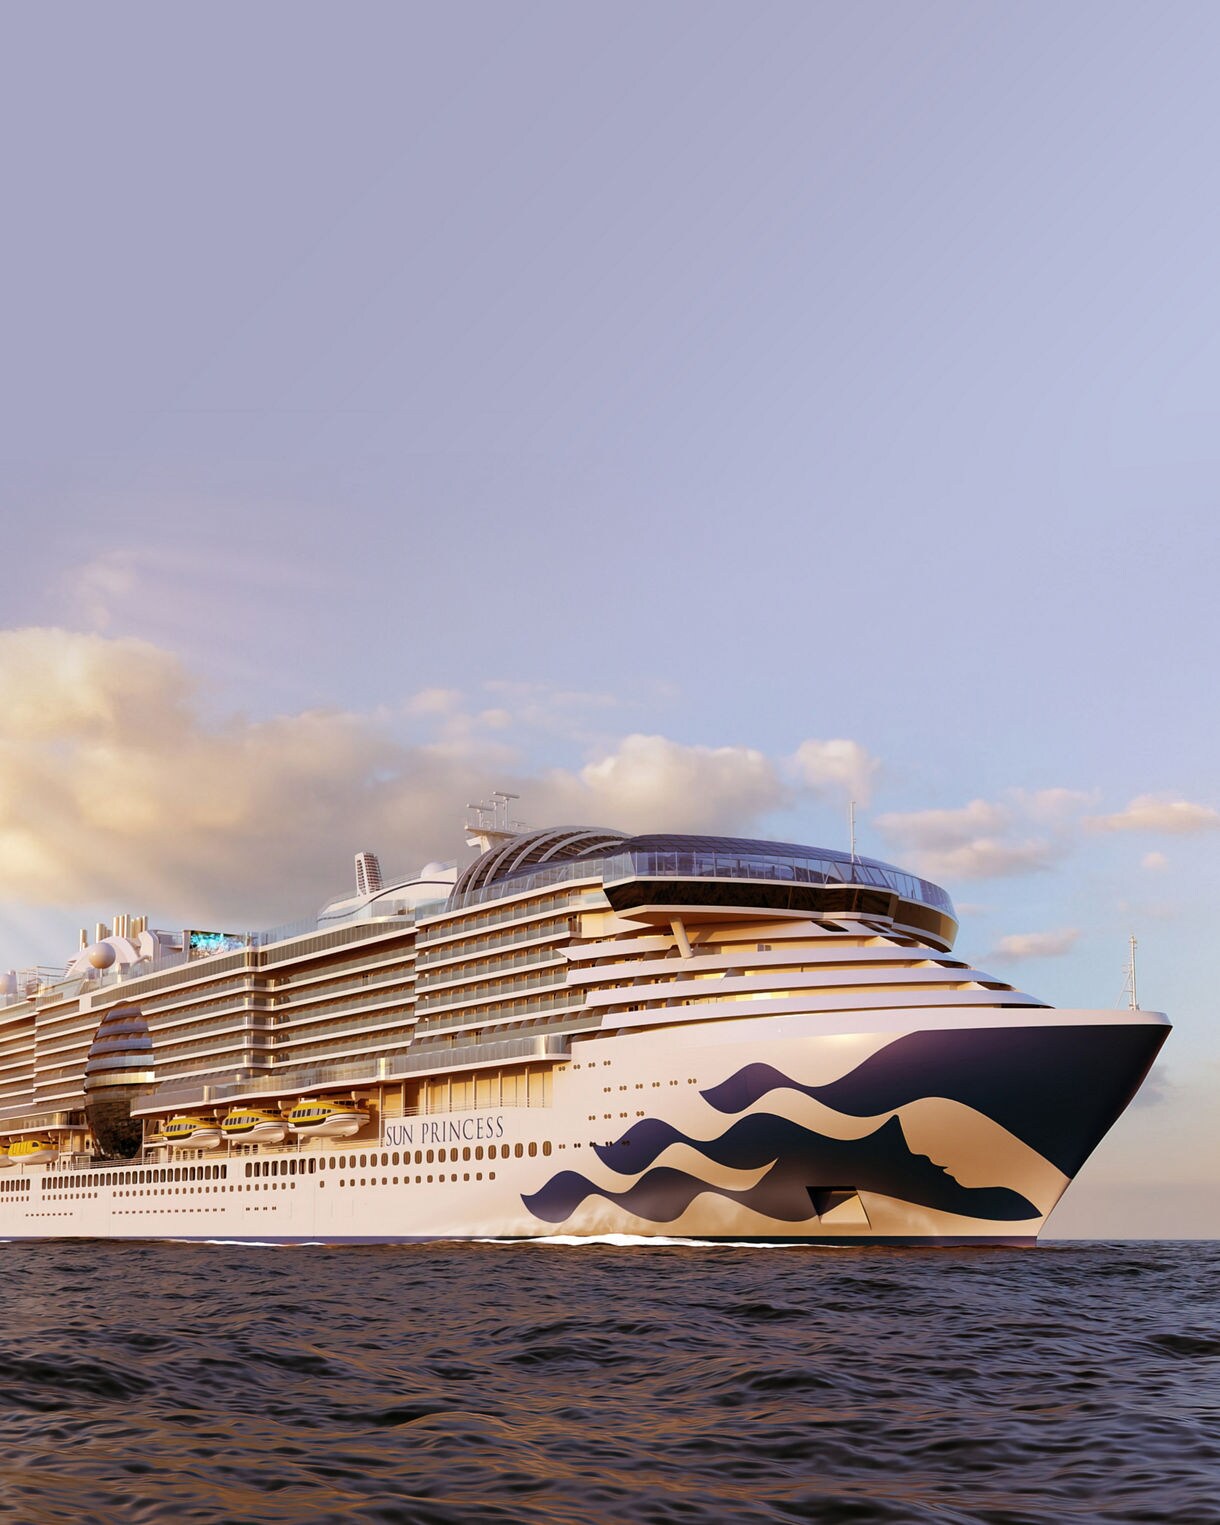 7,459 Shopping Cruise Ship Images, Stock Photos, 3D objects